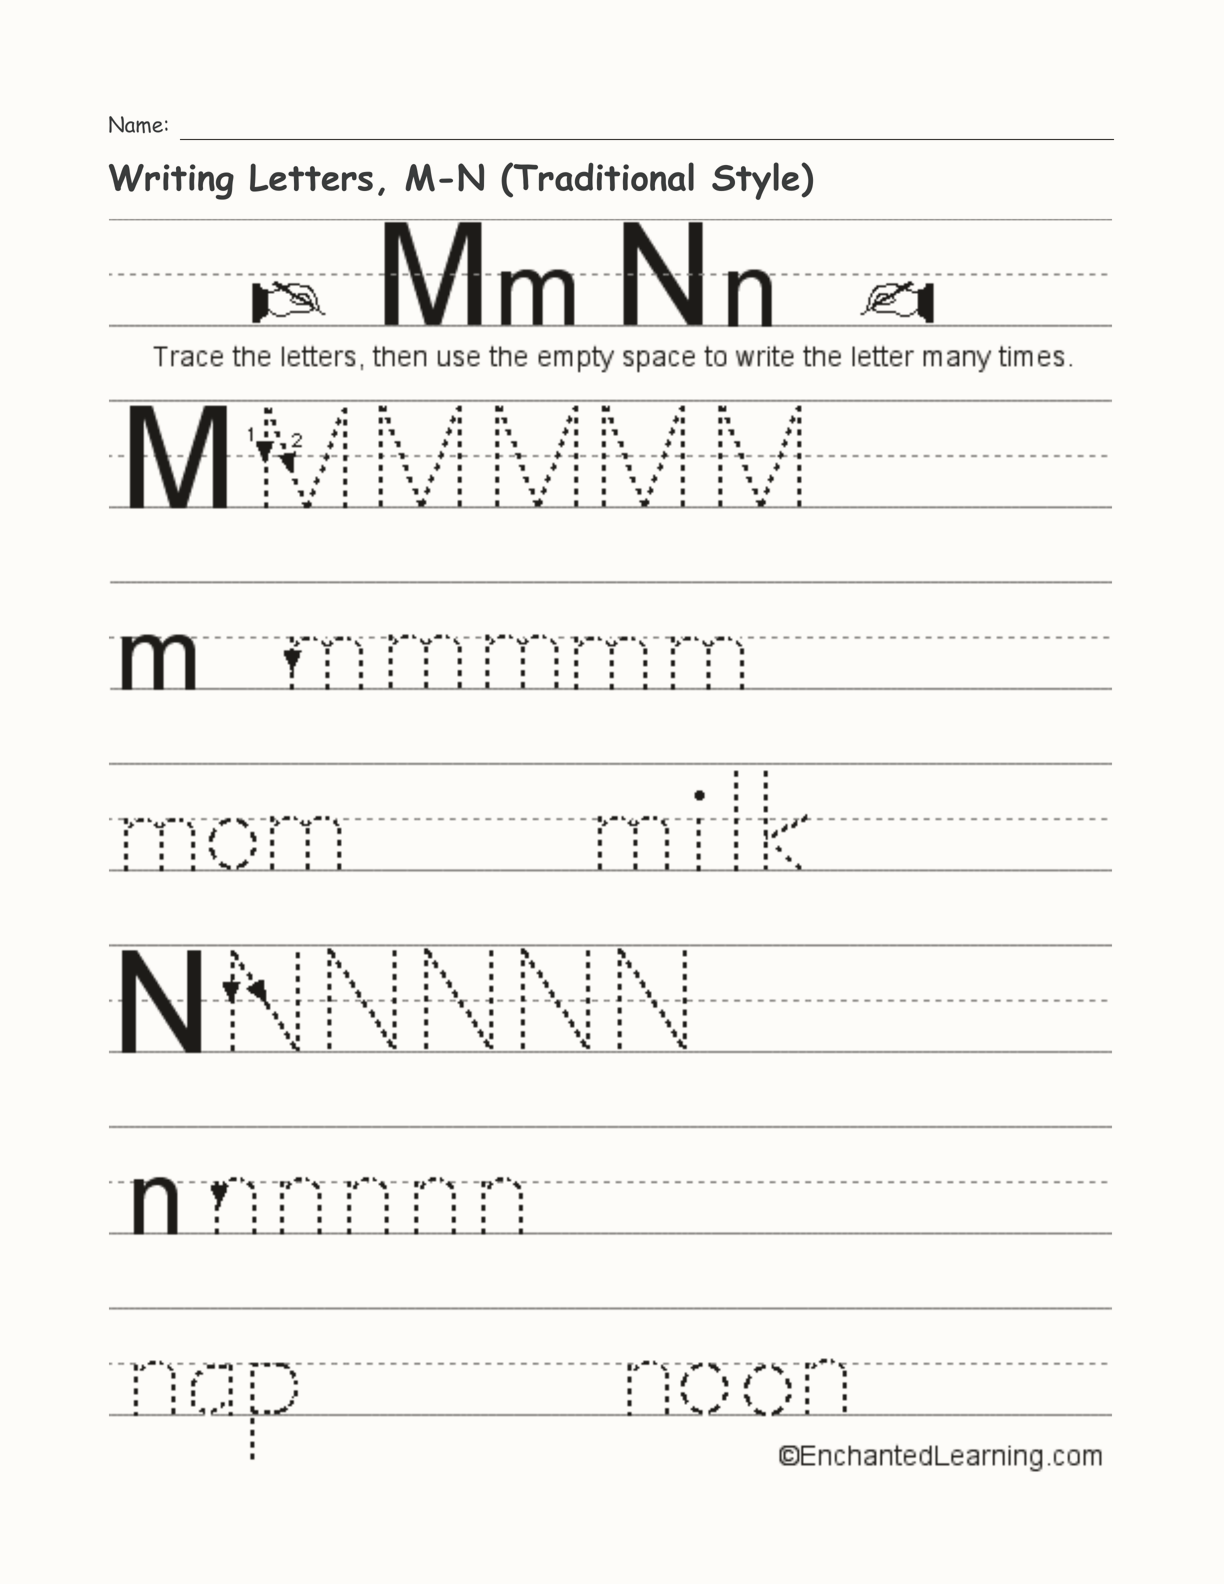 Writing Letters, M-N (Traditional Style) interactive worksheet page 1